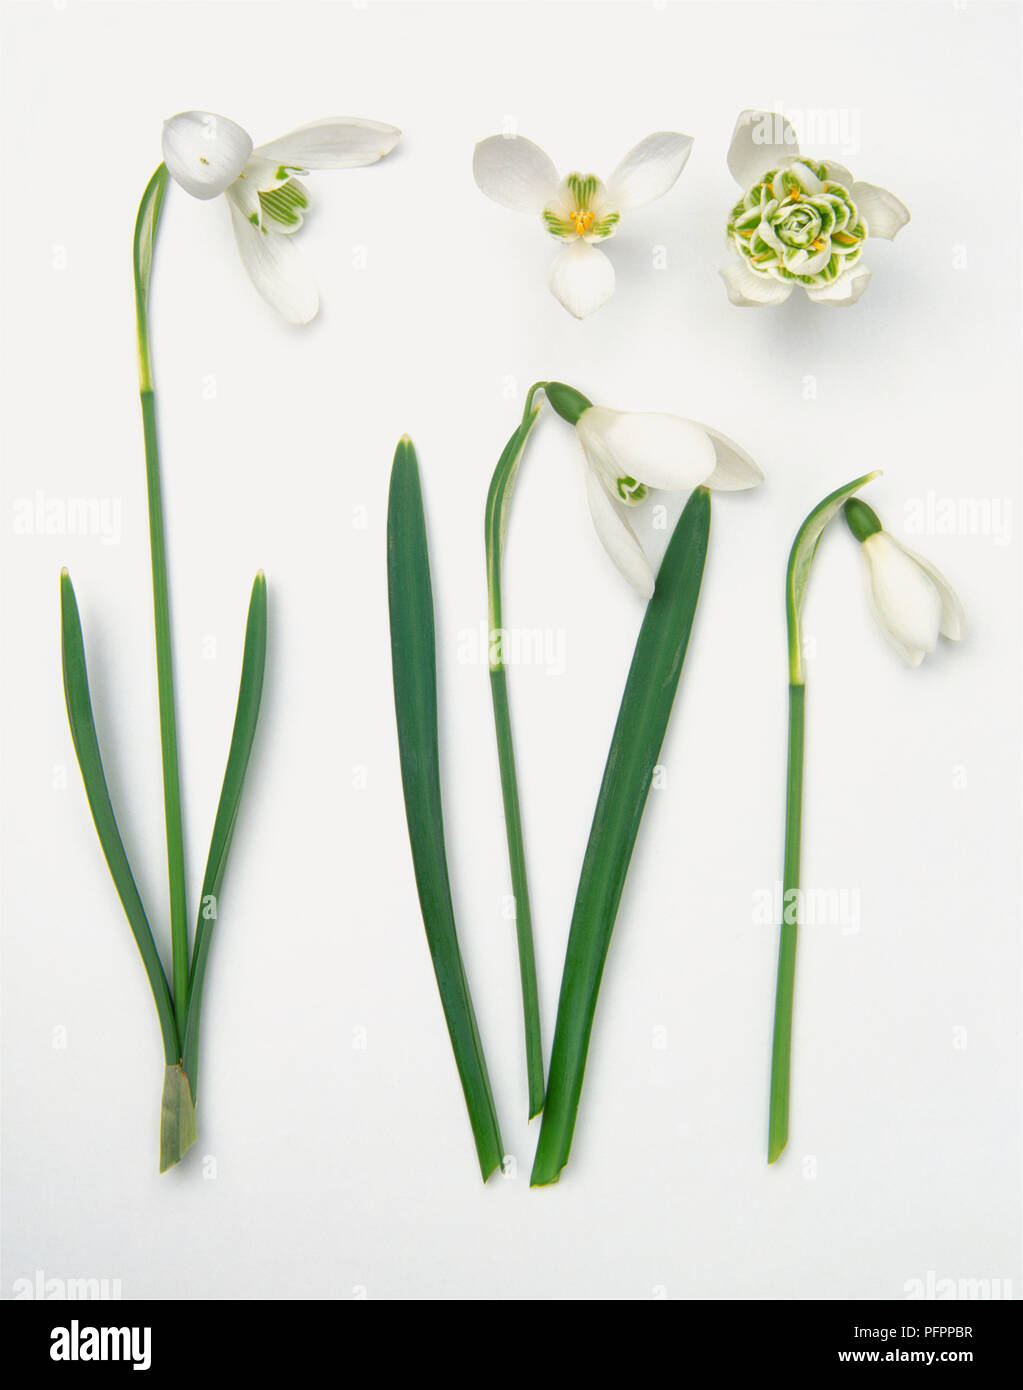 Flowers and leaves from Galanthus nivalis (Snowdrop) Stock Photo